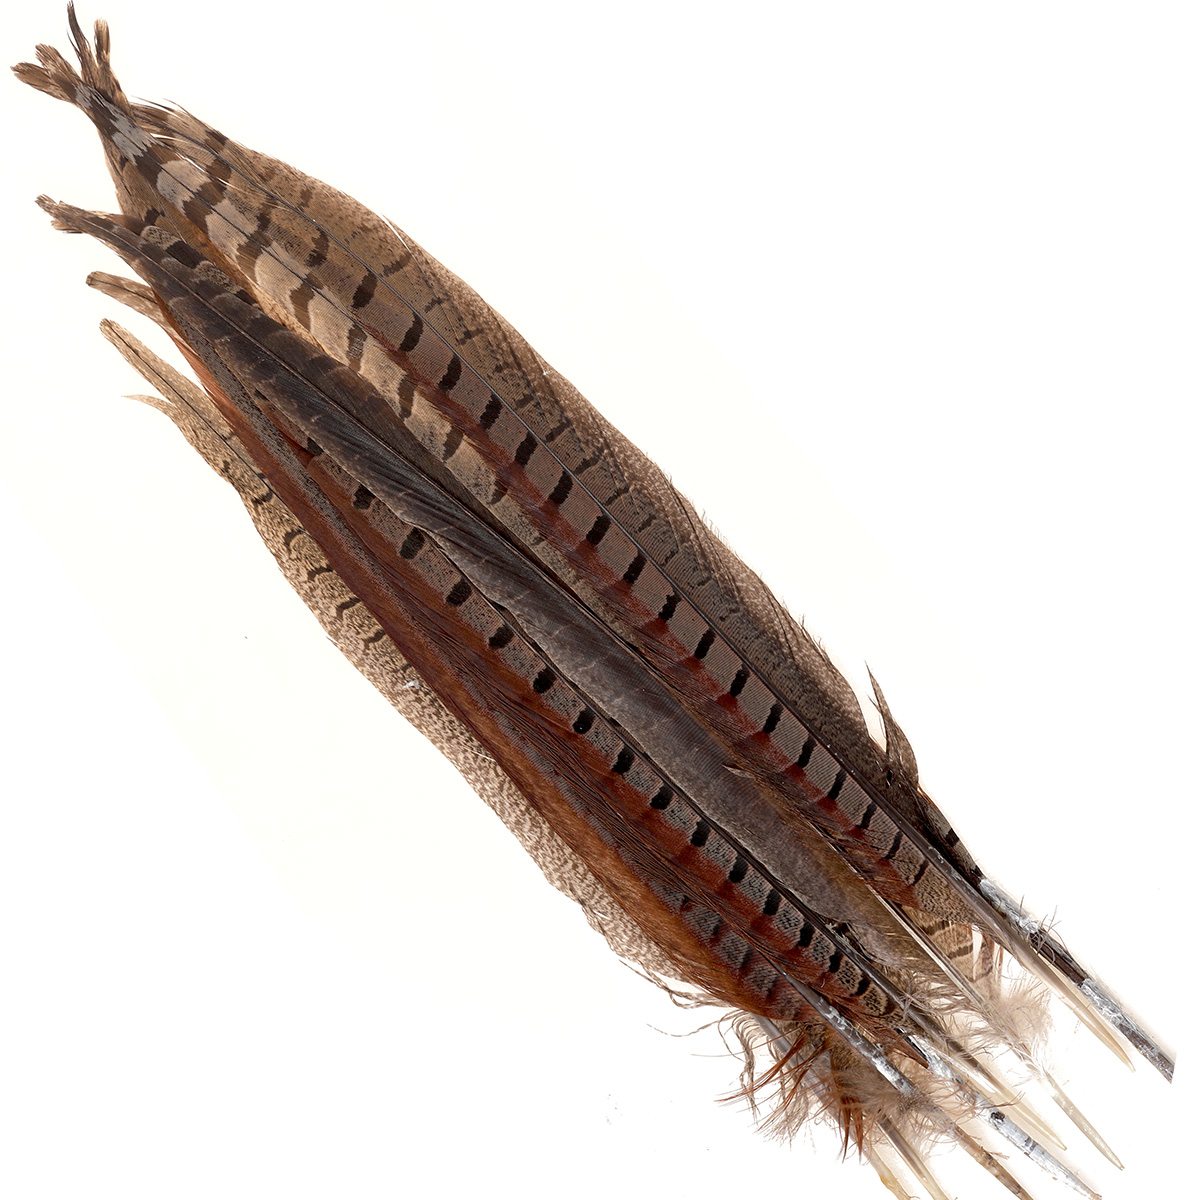 Pheasant Long Side Tails Feathers